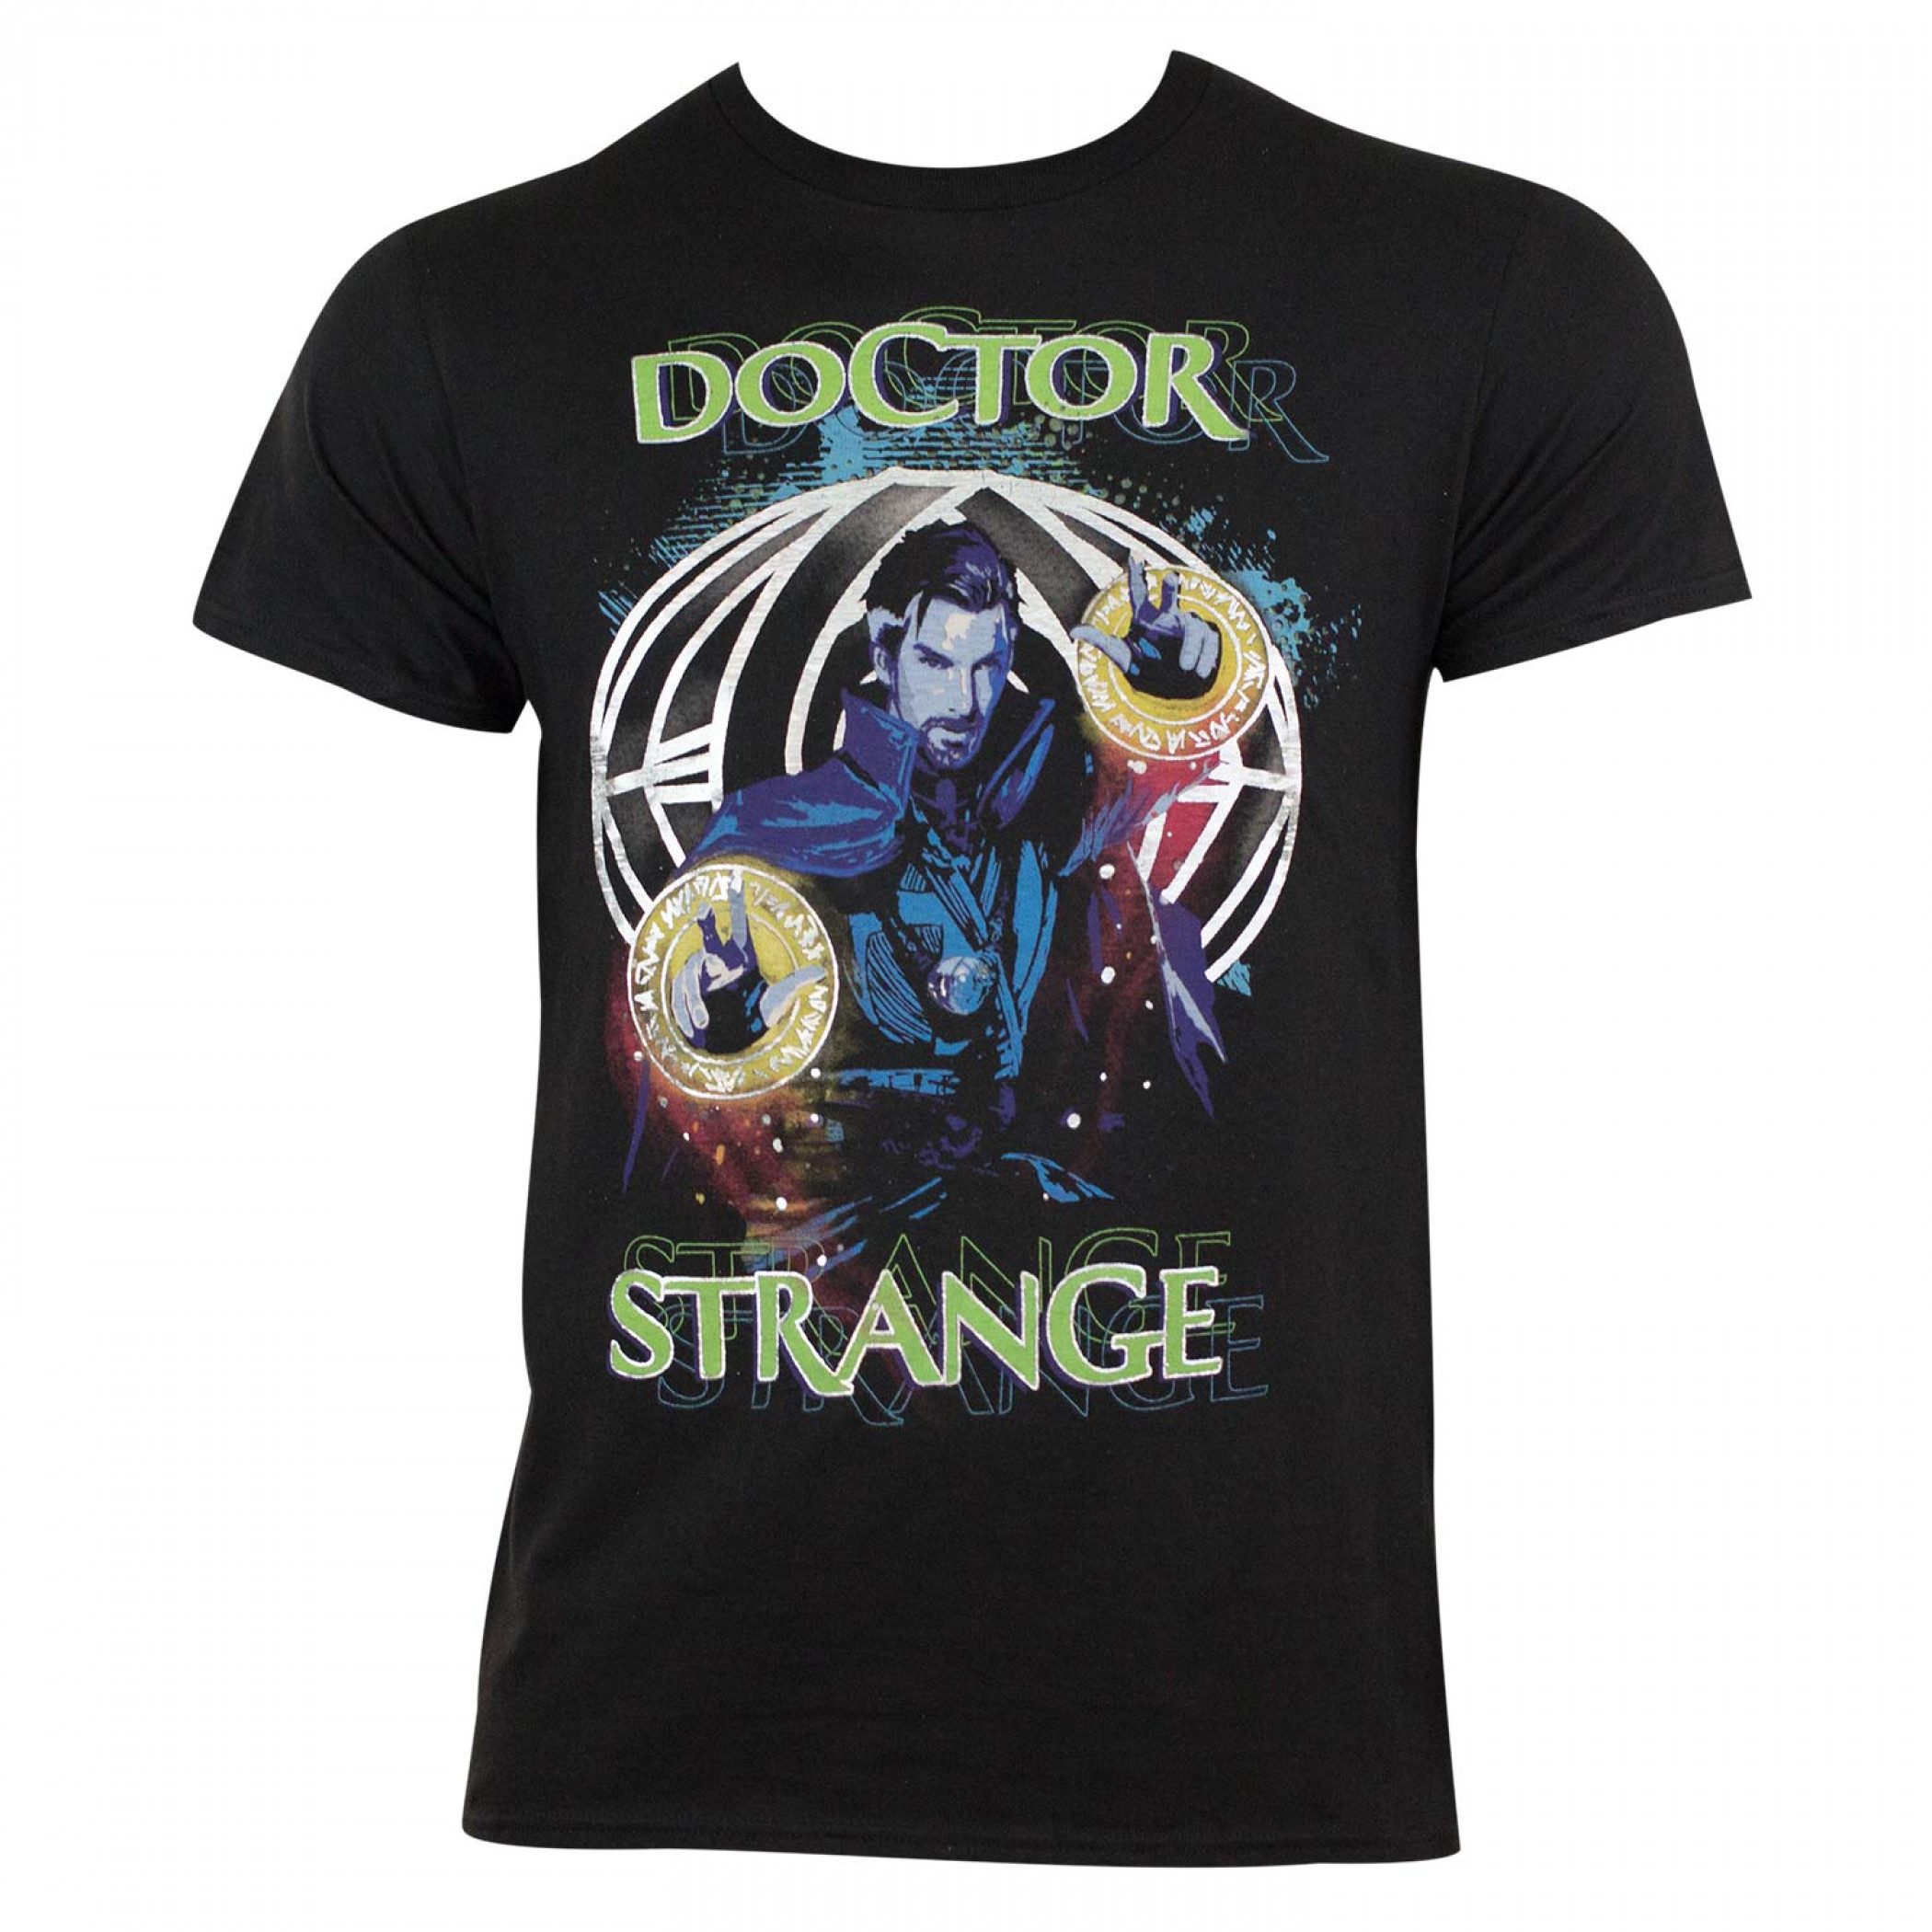 Dr. Strange Witching Hour Iridescent Foil Tee Shirt